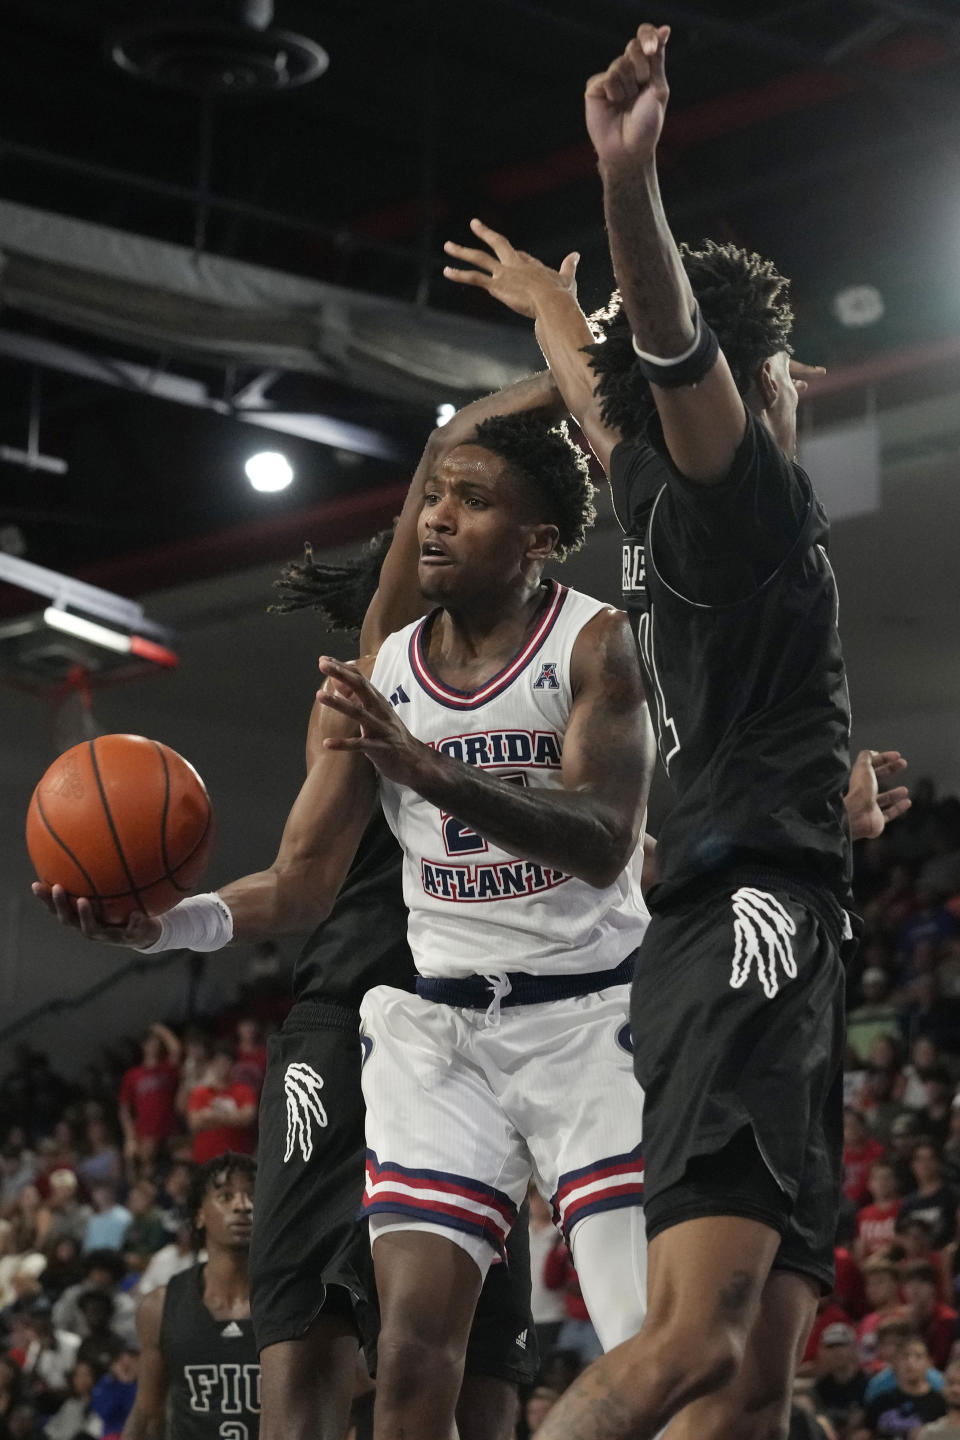 Florida Atlantic guard Brandon Weatherspoon (23) passes the ball under pressure from Florida International guard Jayden Brewer (11) and center Seth Pinkney during the first half of an NCAA college basketball game, Wednesday, Dec. 13, 2023, in Boca Raton, Fla. (AP Photo/Marta Lavandier)